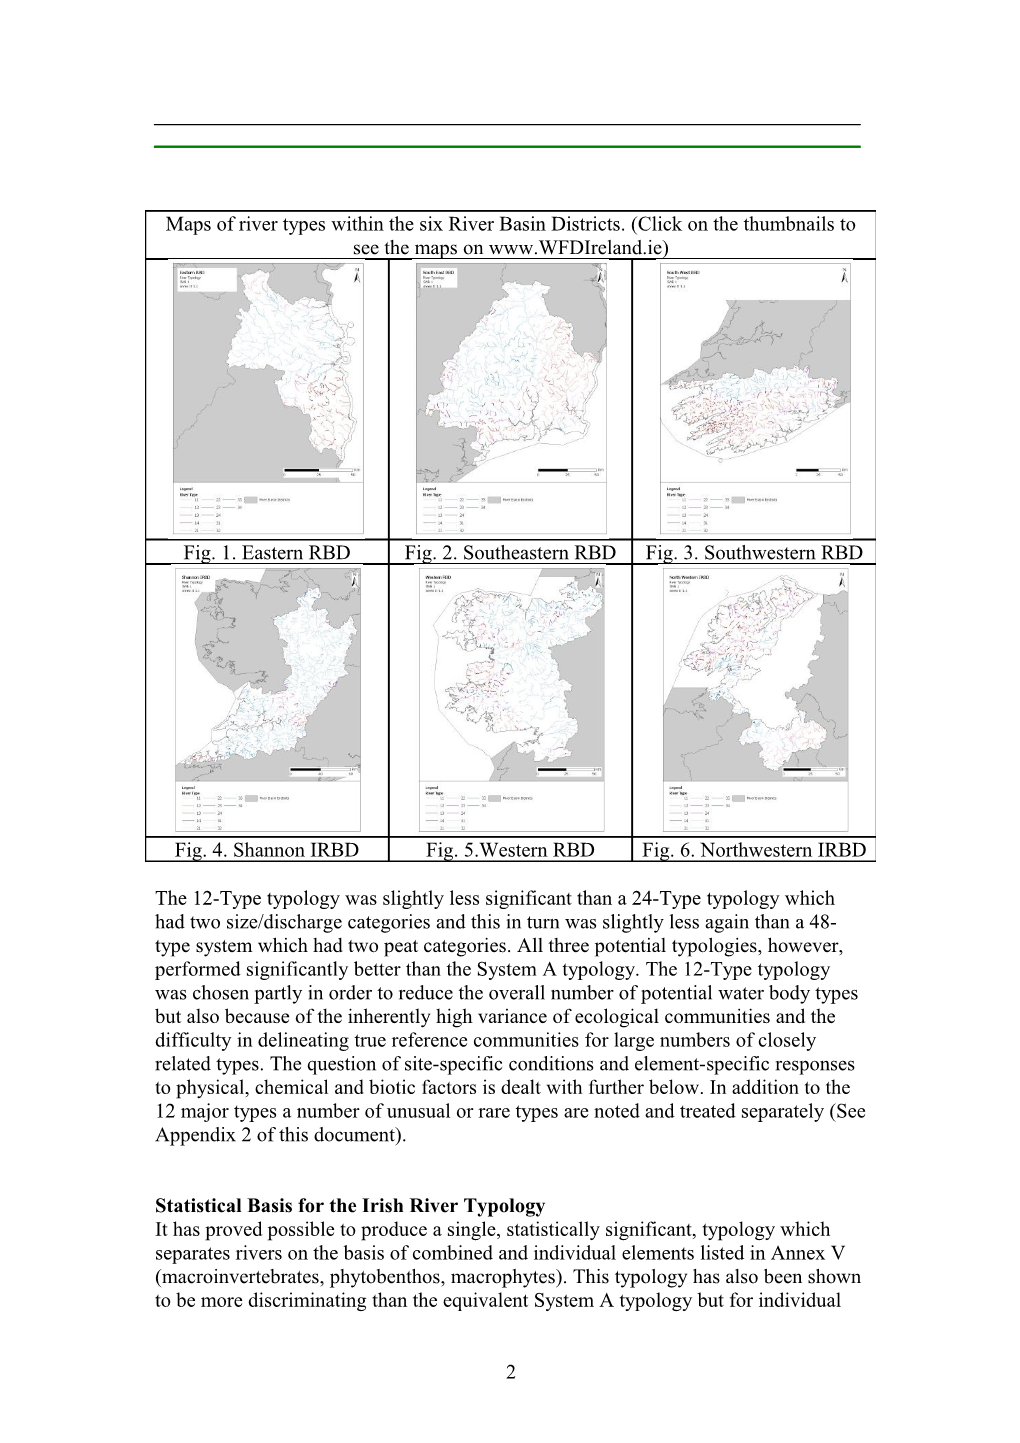 Reference Conditions for Irish Rivers Description of River Types and Communities